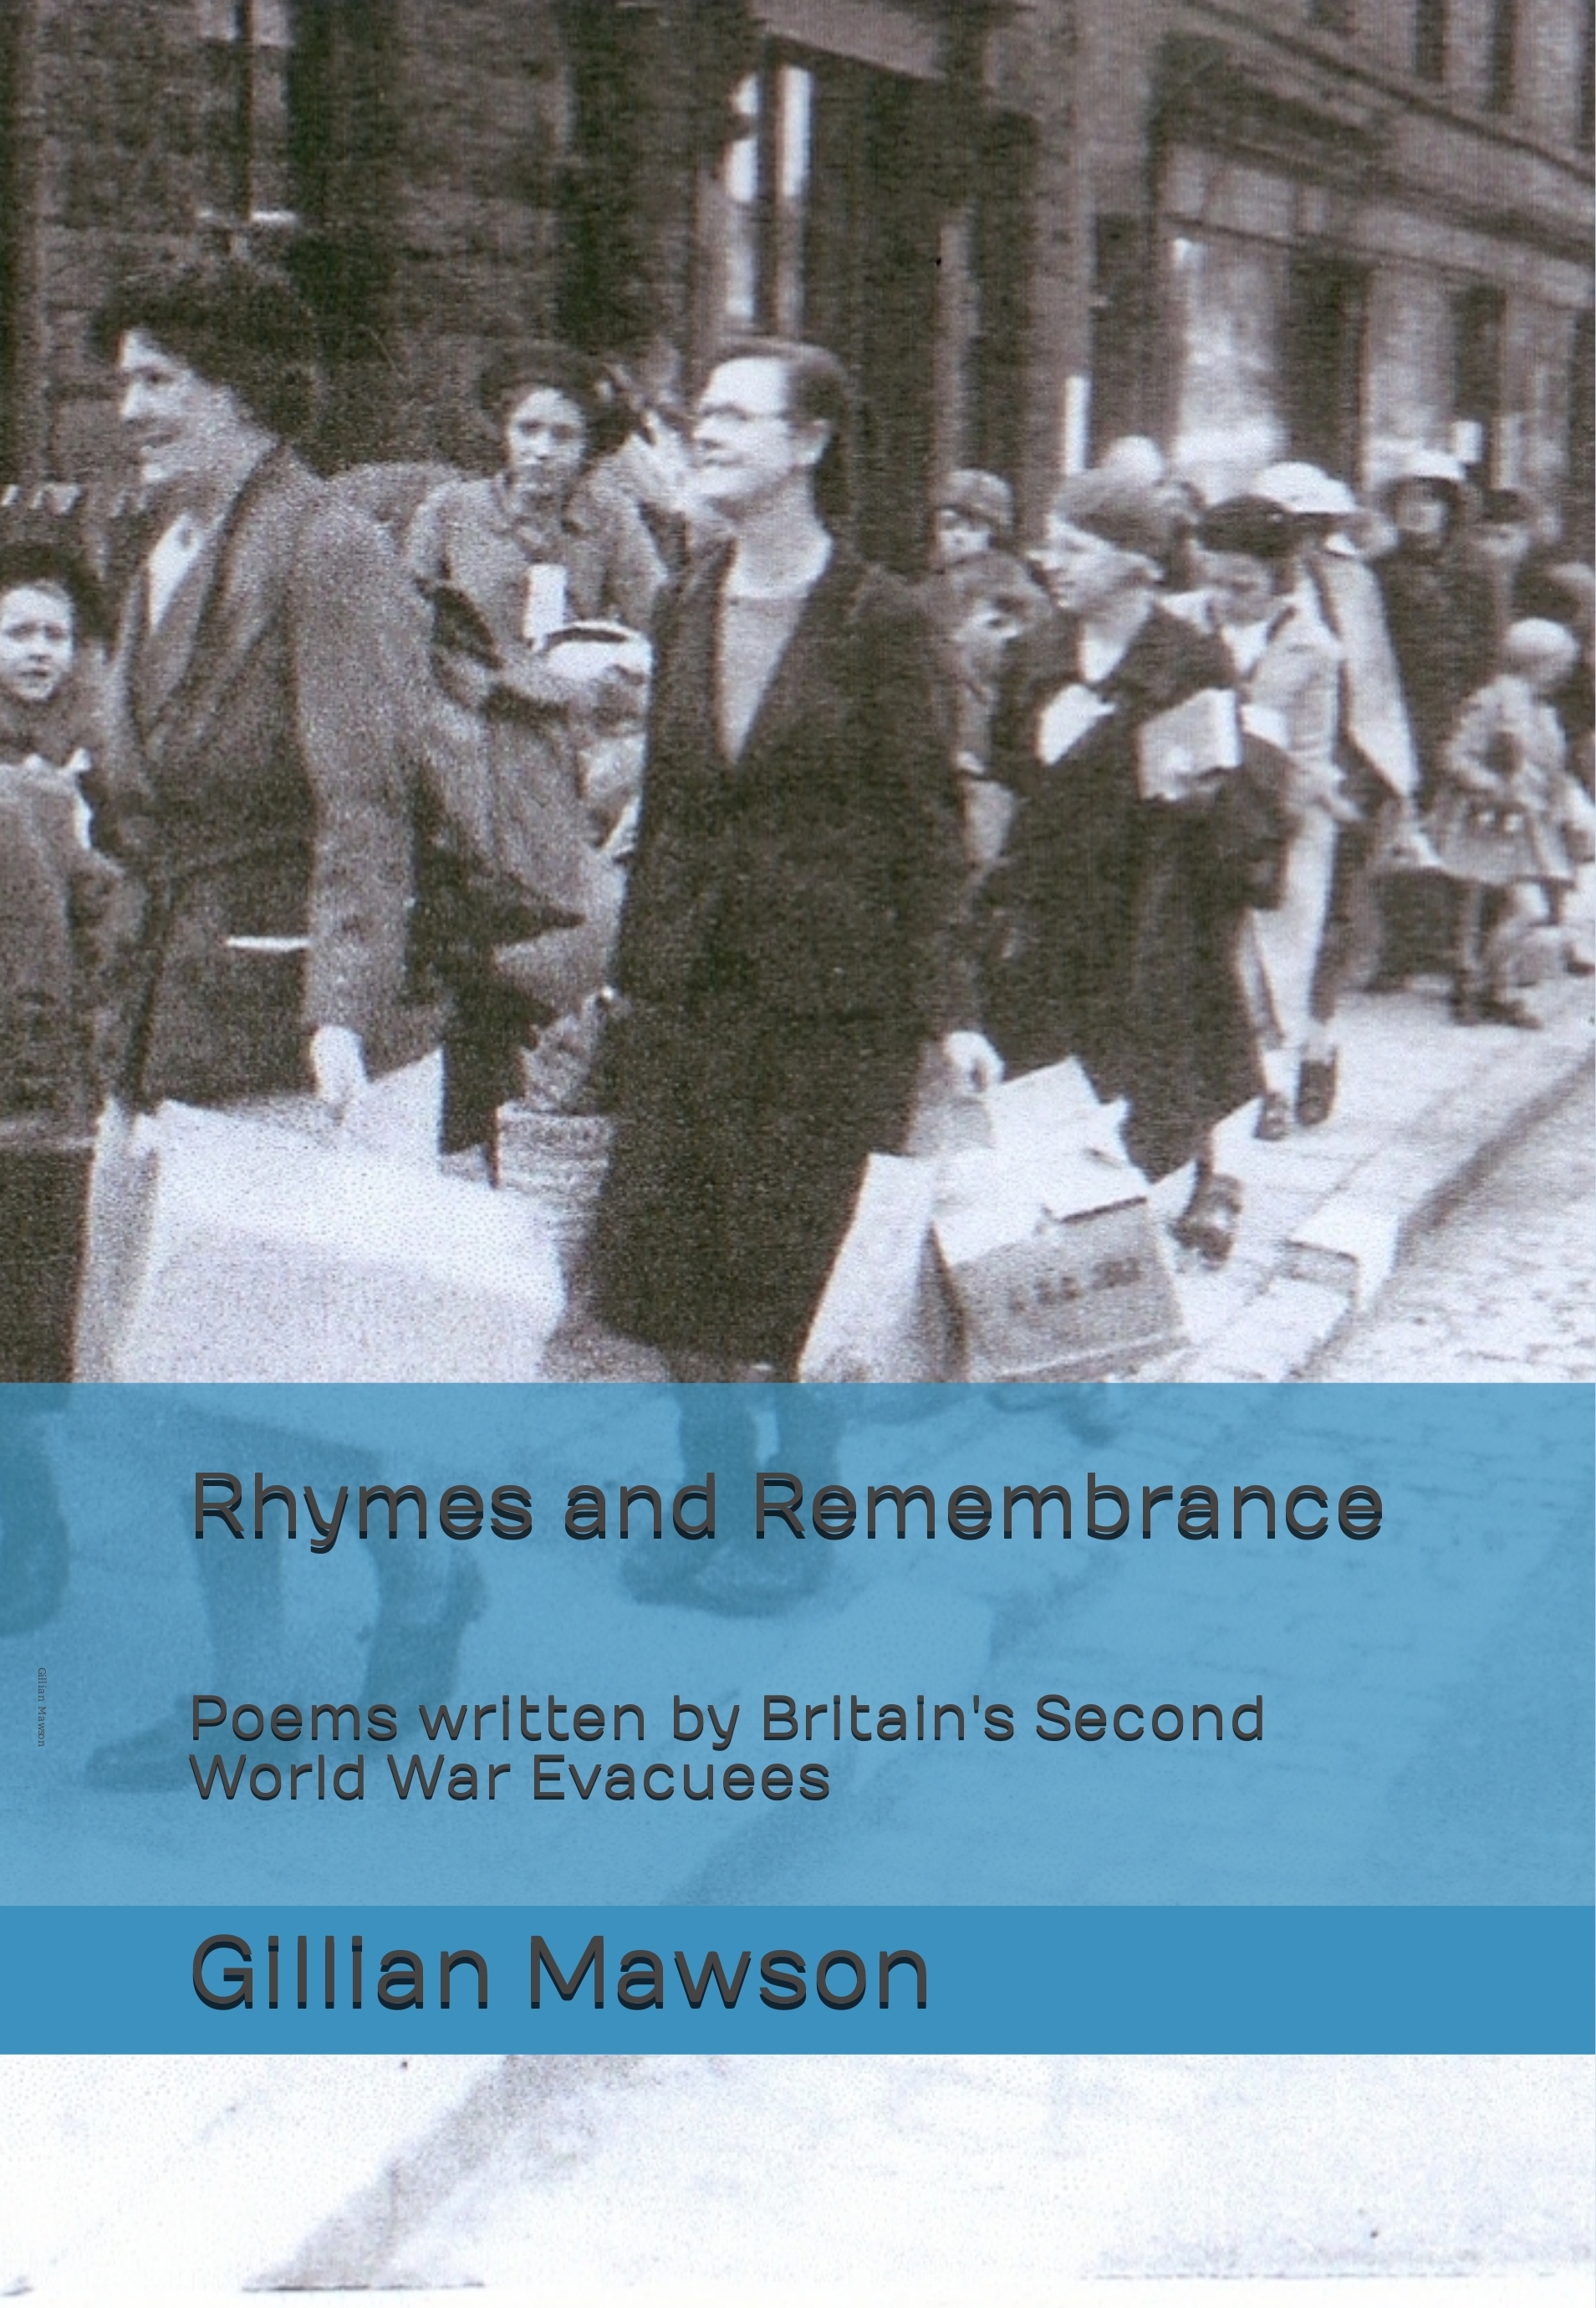 Rhymes and Remembrance by Gillian Mawson